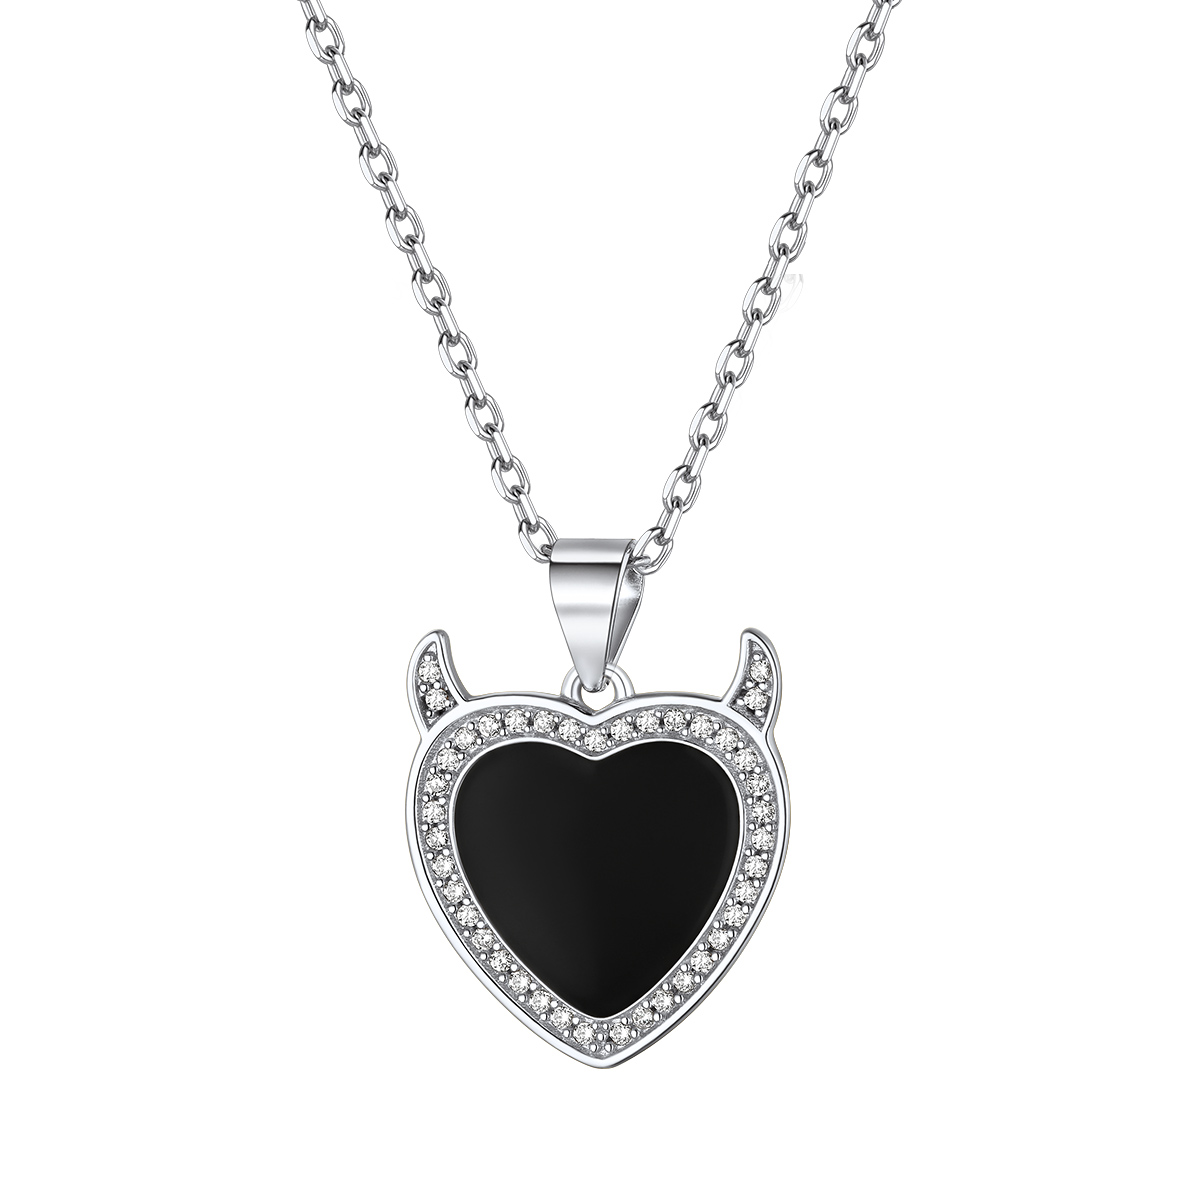 ChicSilver 925 Sterling Silver Devil Horns Heart Necklace For Women 